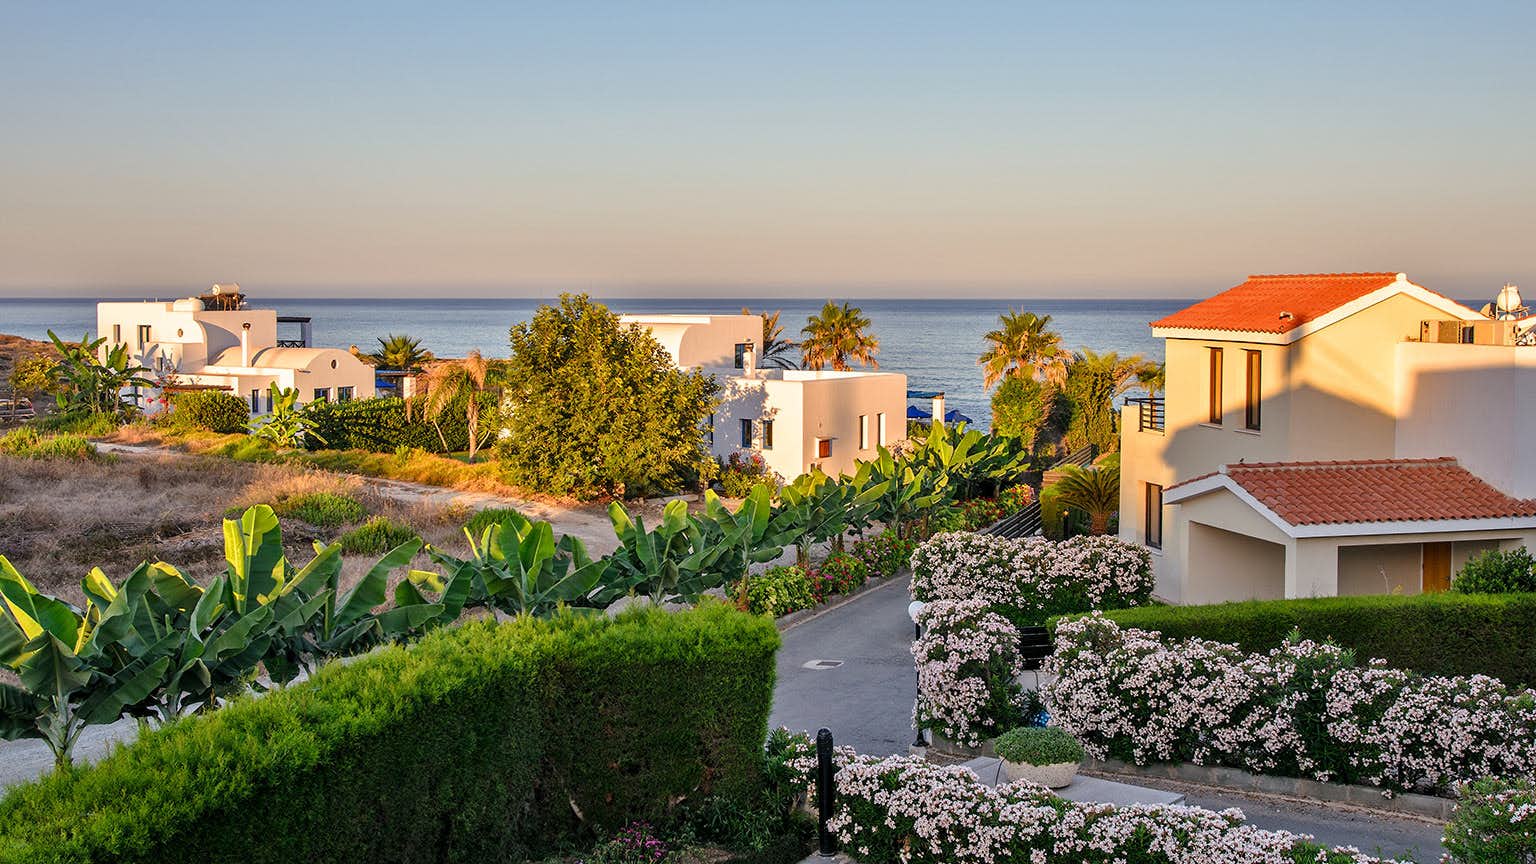 3 ways to get Cyprus permanent residence and move to the Mediterranean